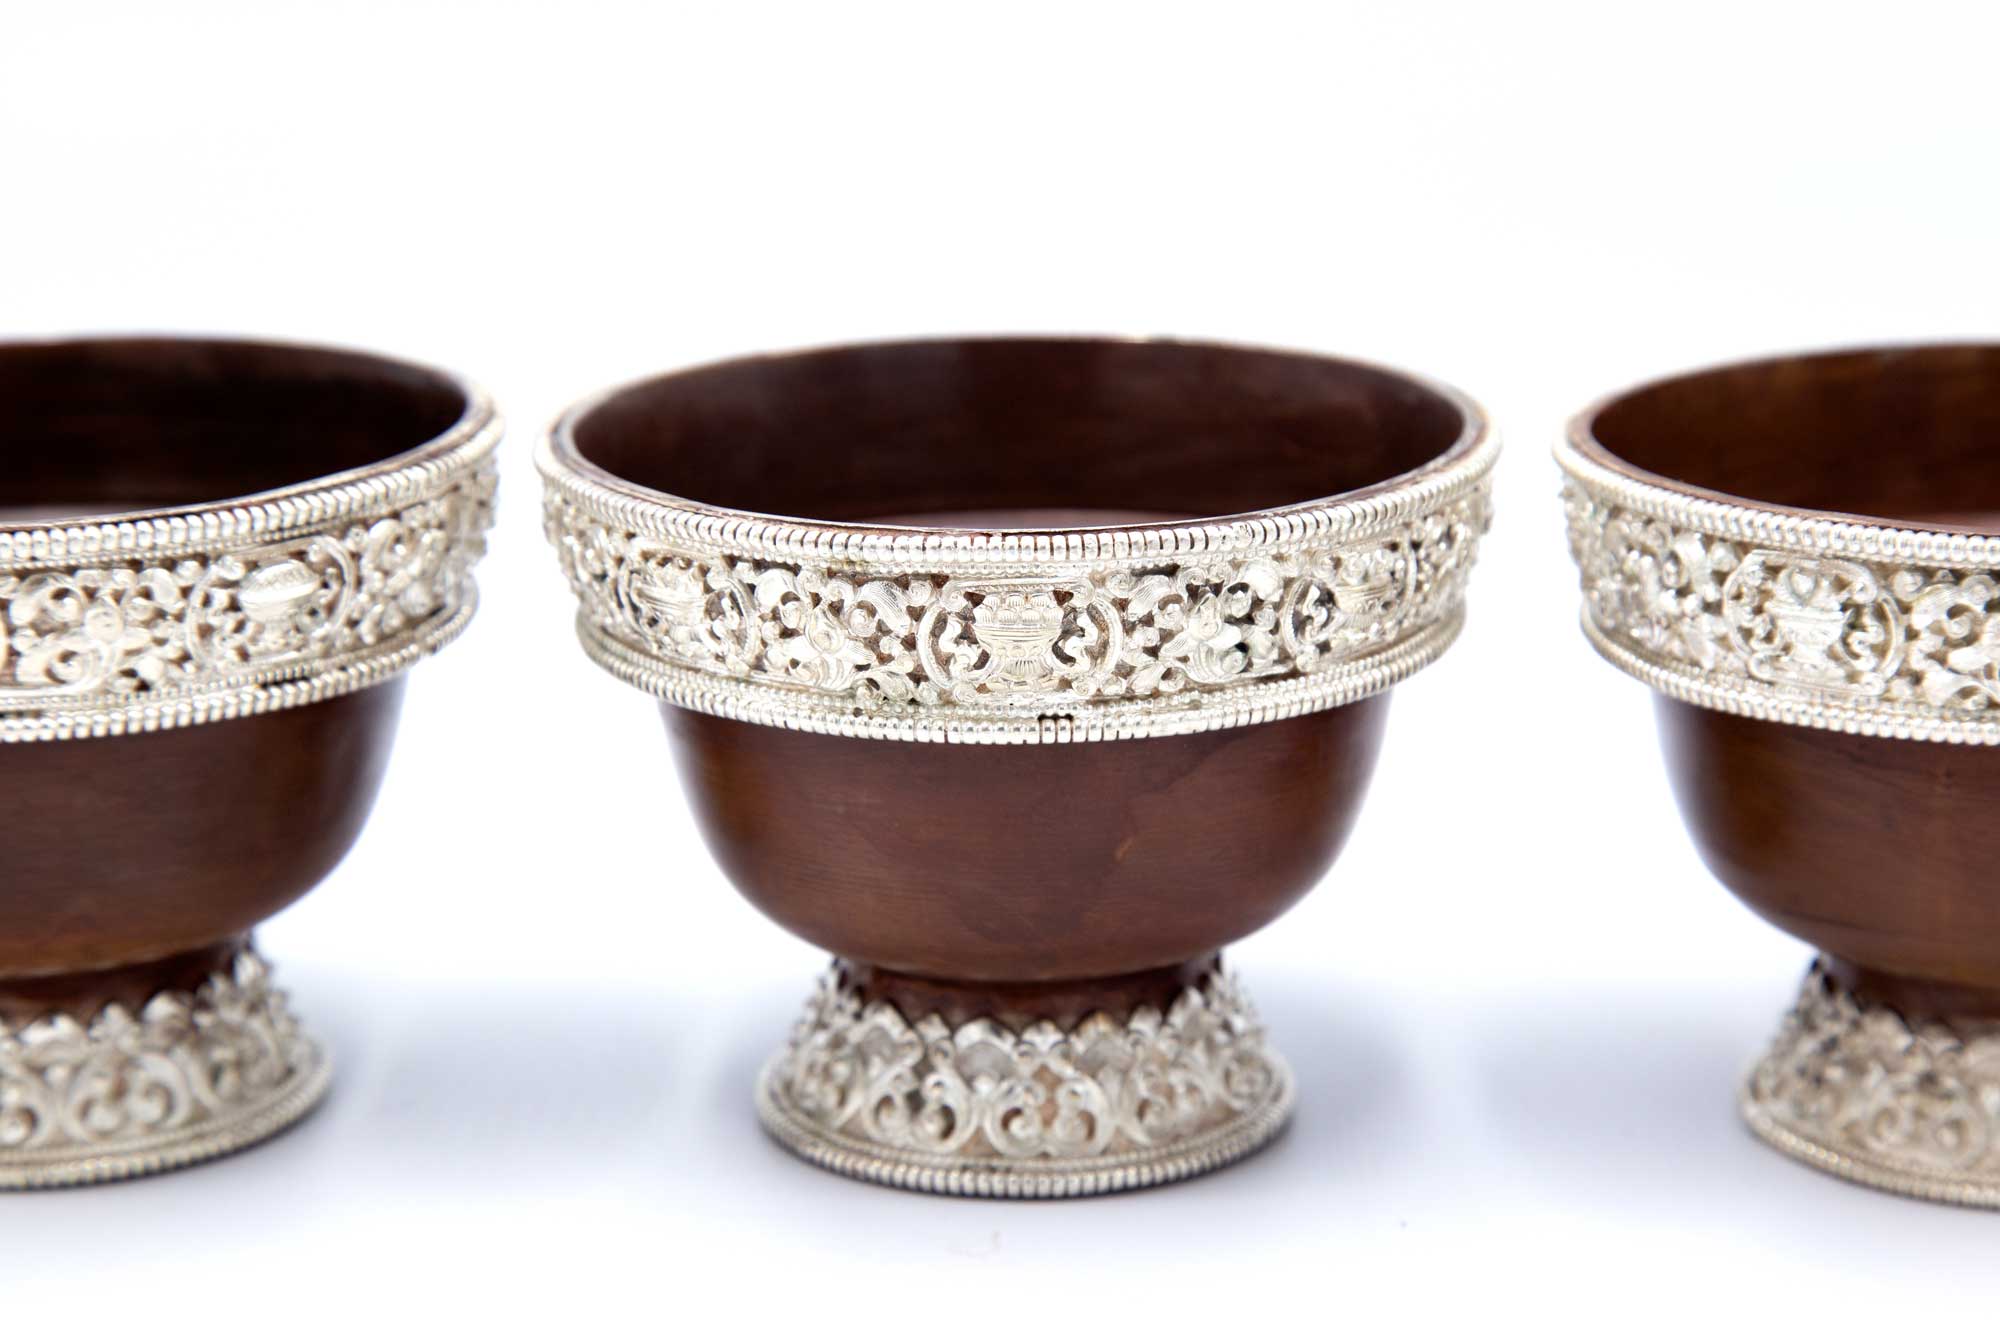 Copper and Pure Silver Offering Bowls - 4"